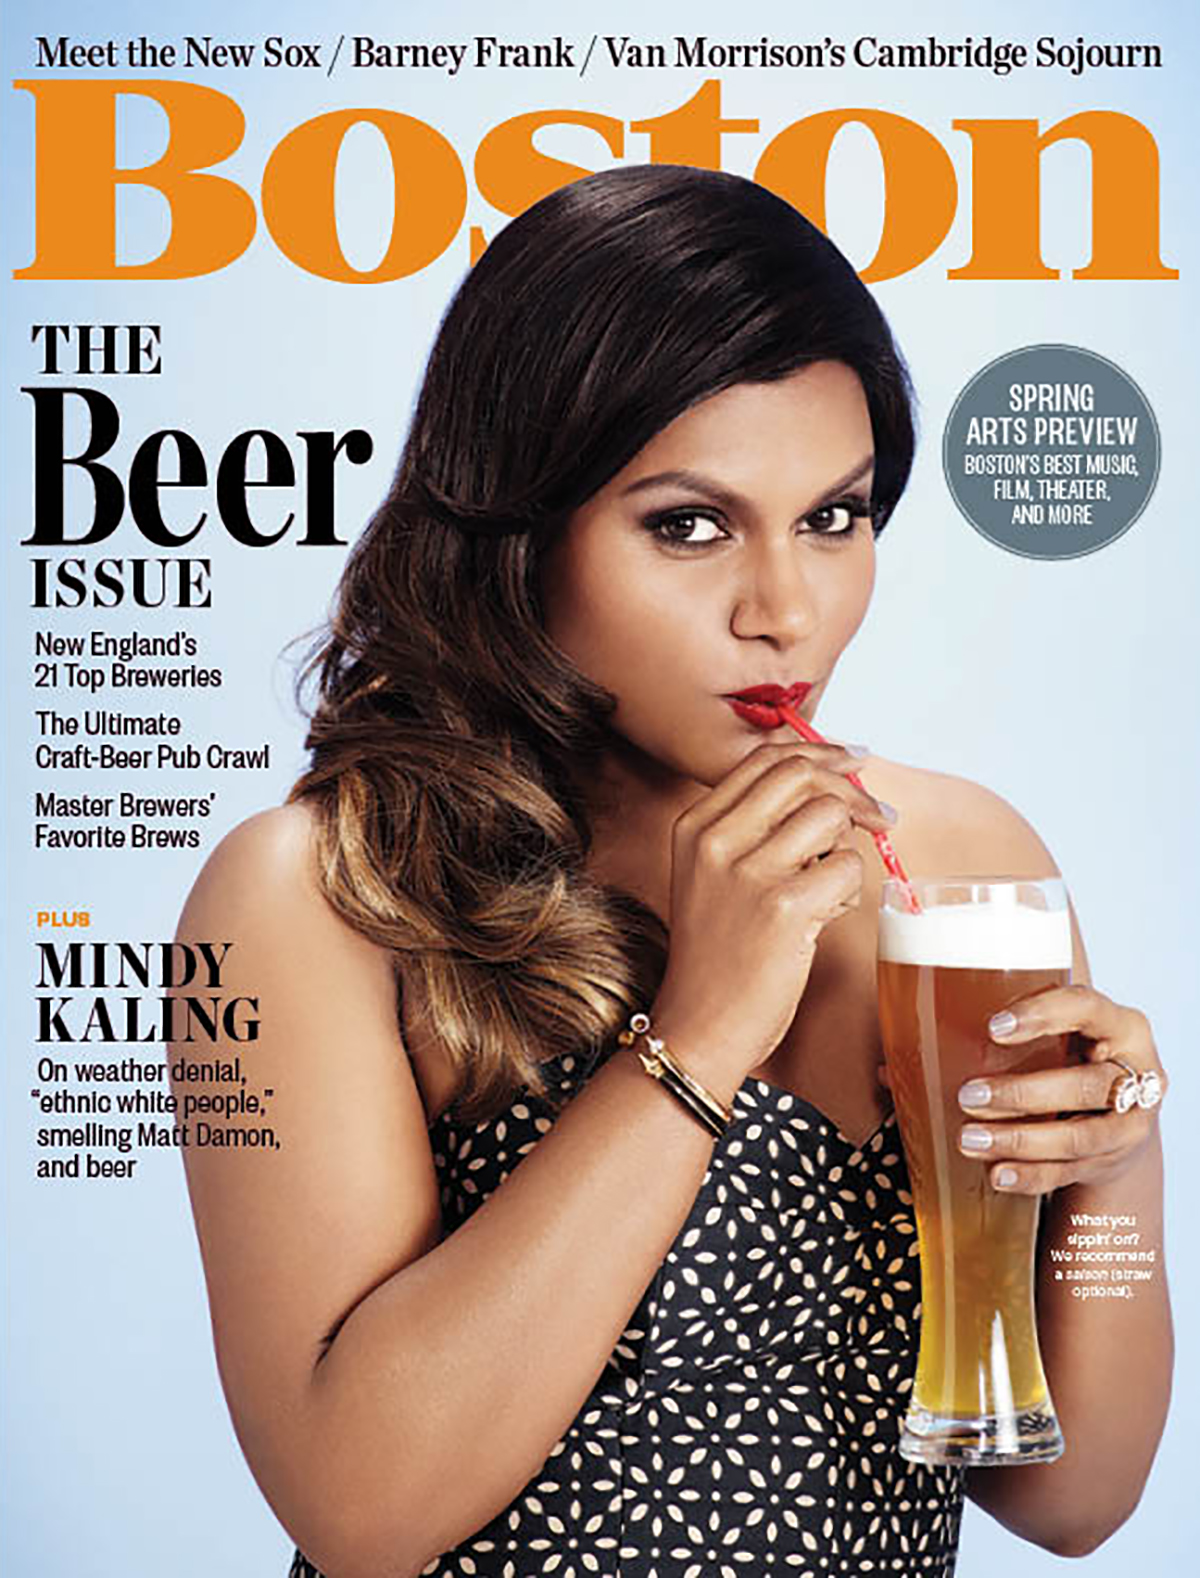 Mindy Kaling on the cover of Boston Magazine - April 2015